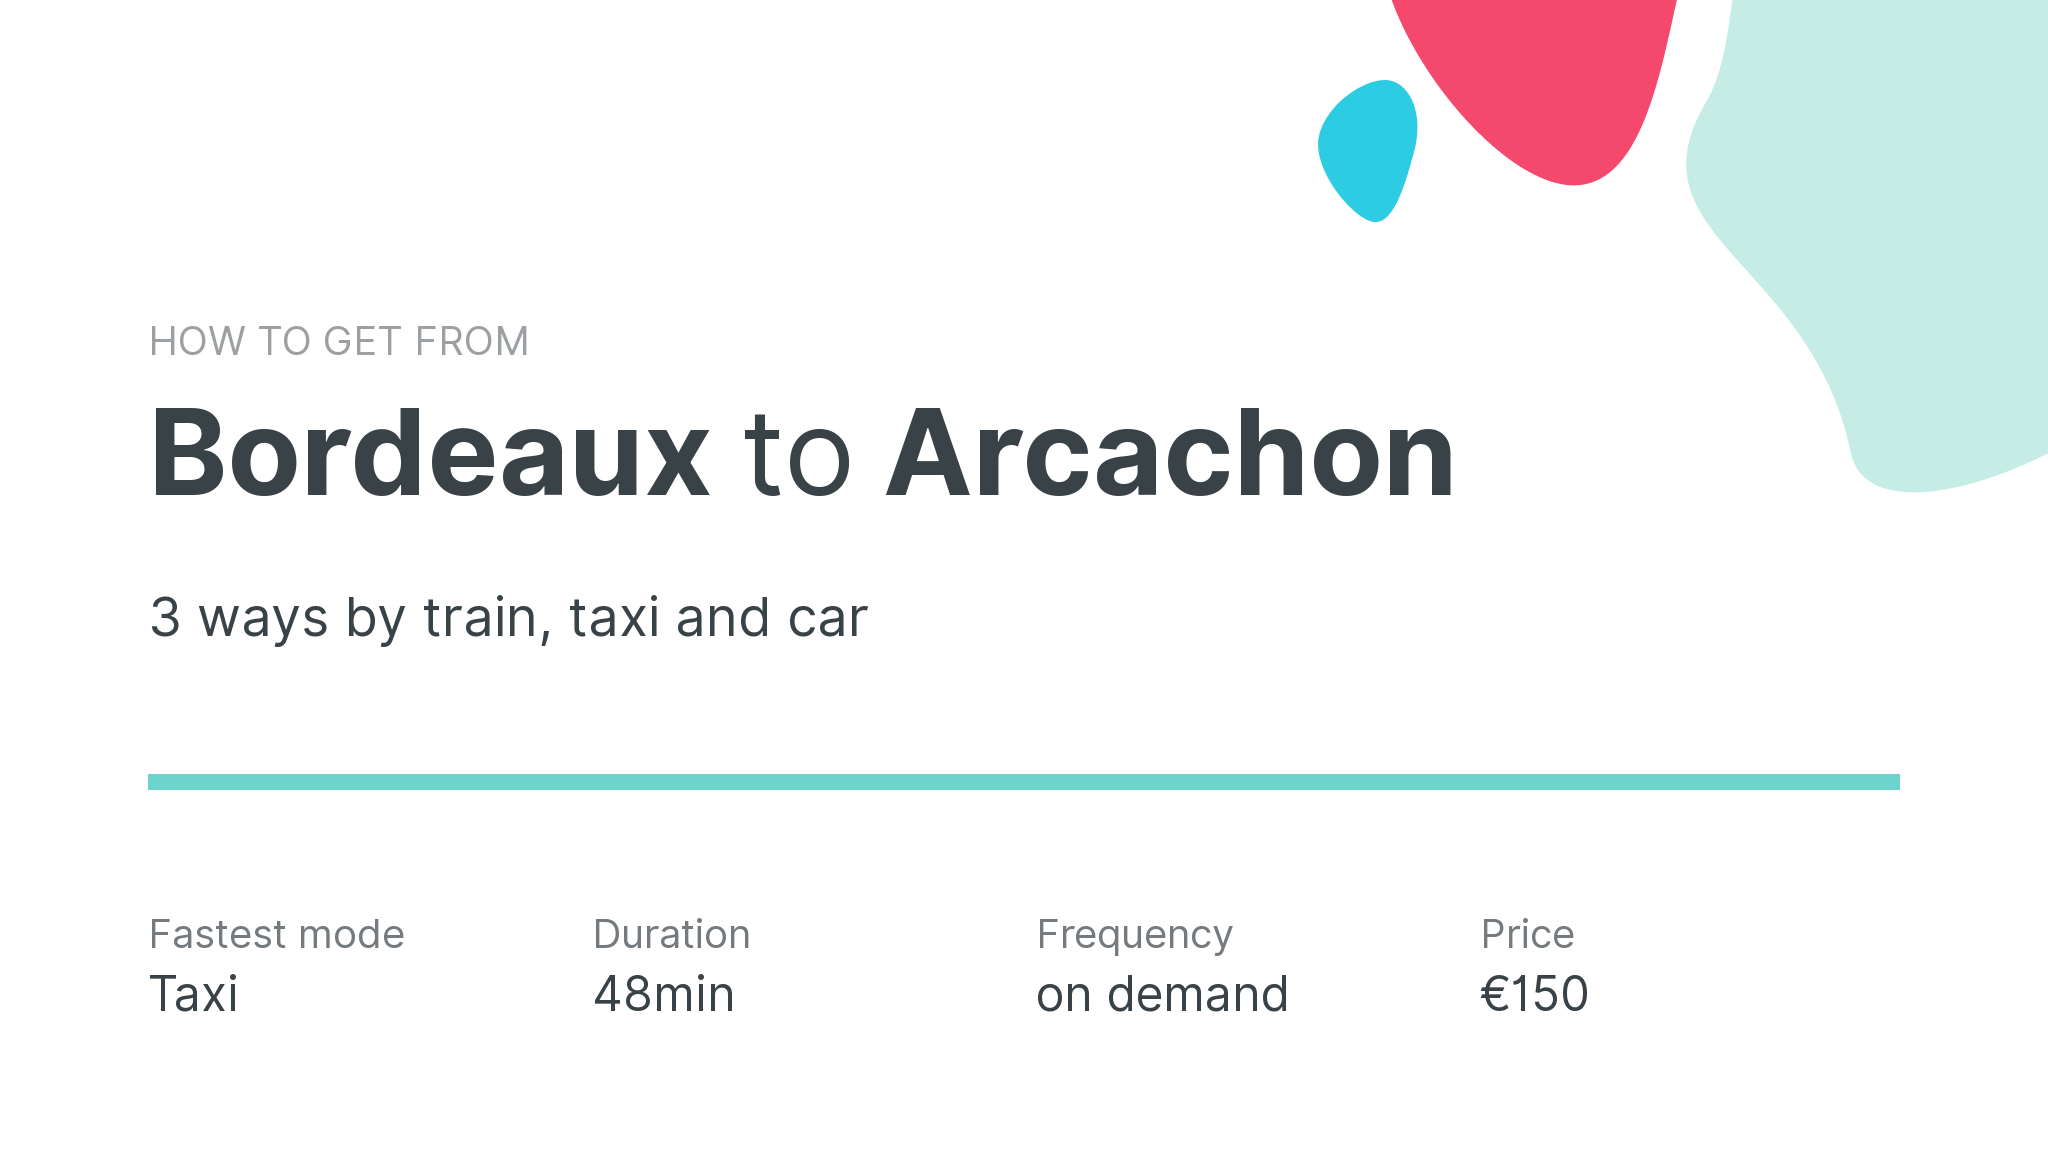 How do I get from Bordeaux to Arcachon